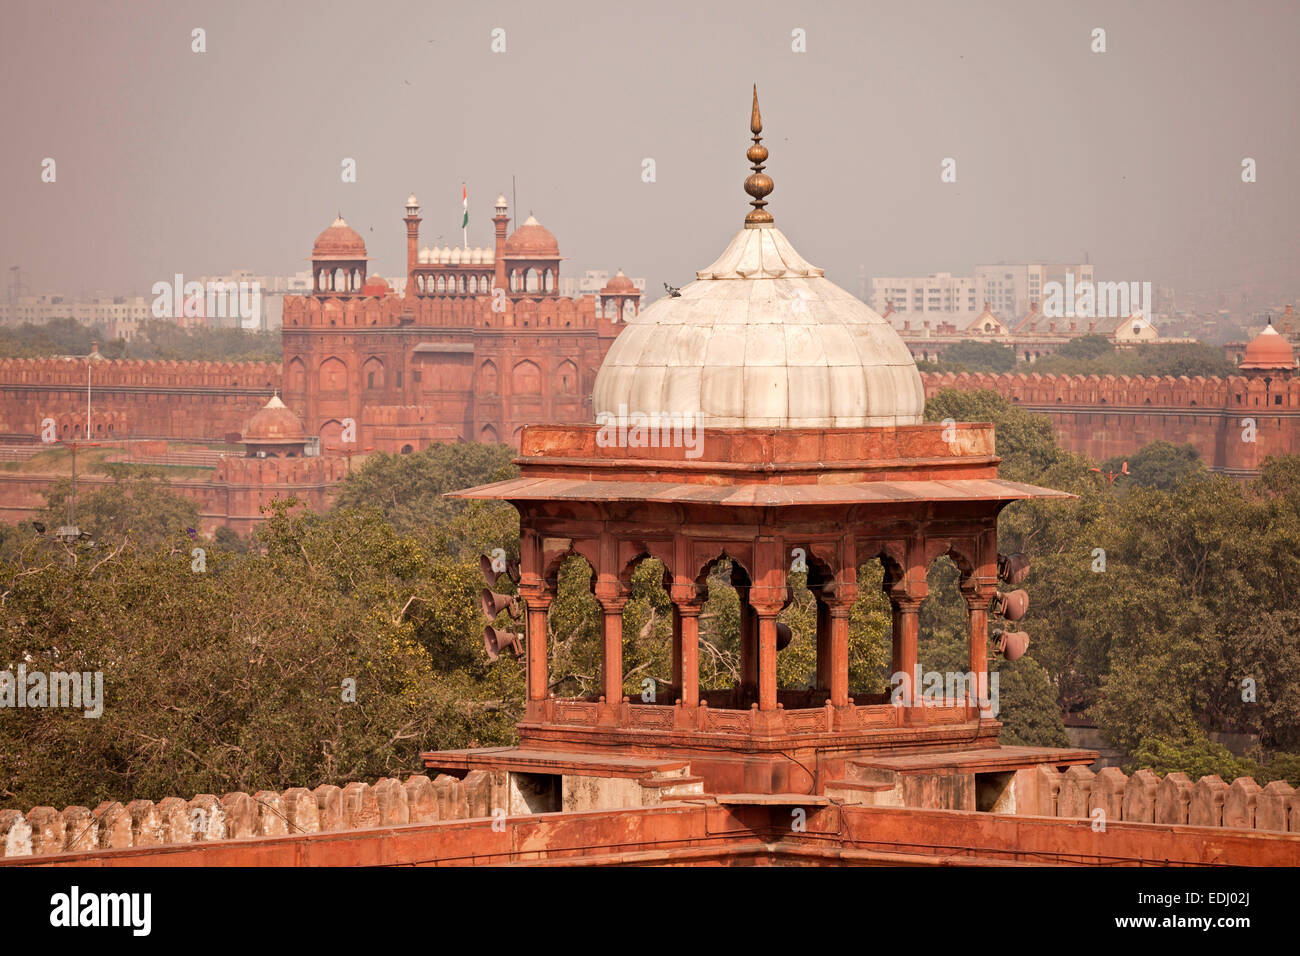 Dome of the Friday Mosque Jama Masjid with the Red Fort, Delhi, India Stock Photo